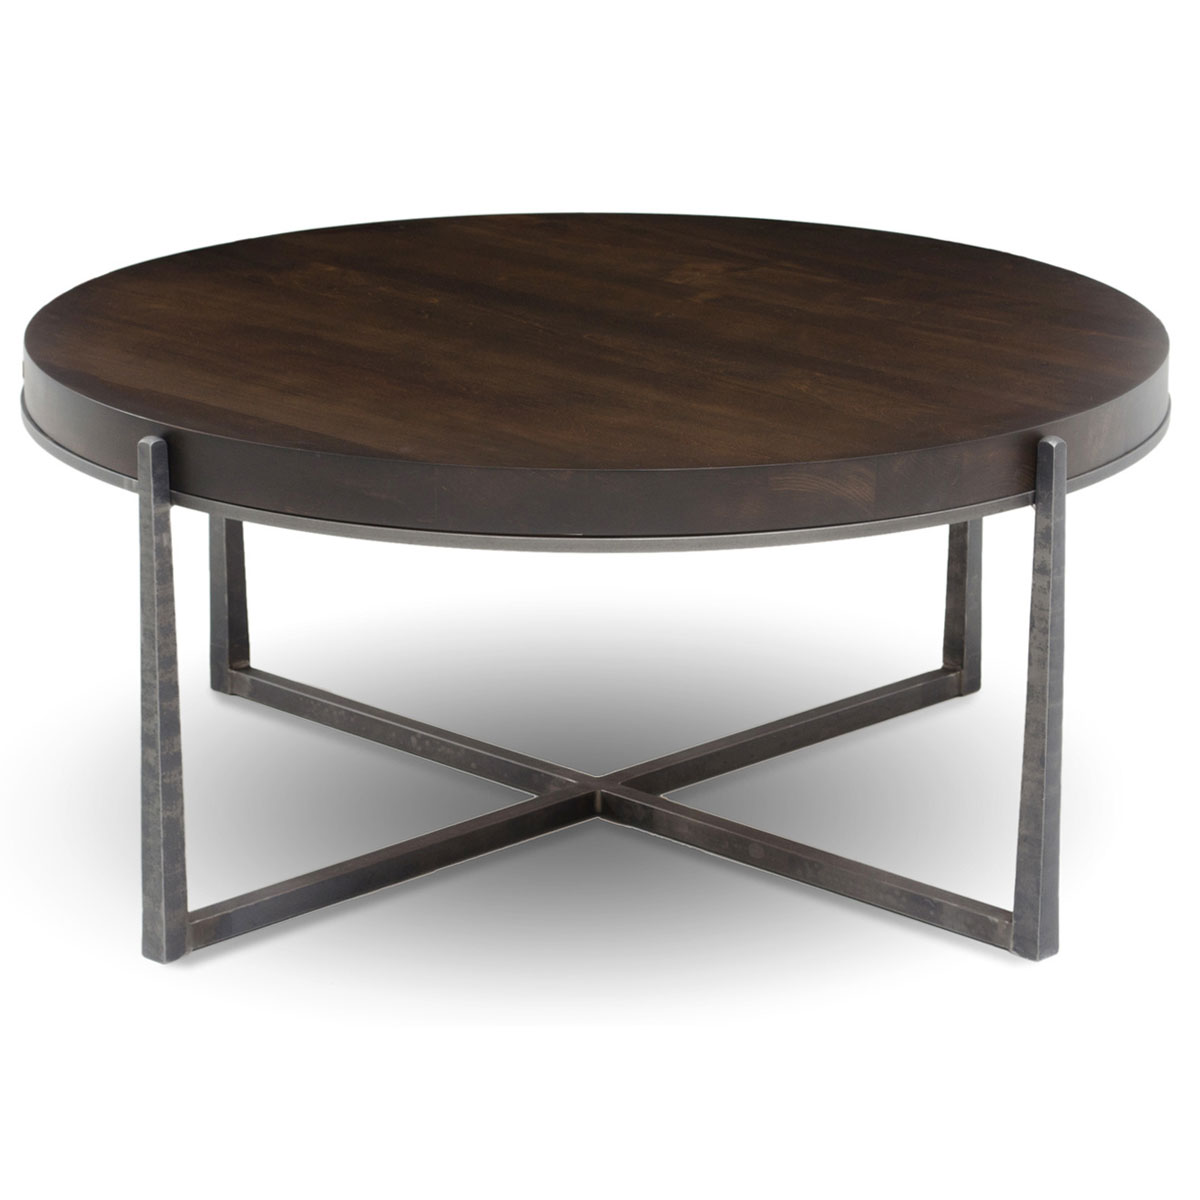 Charleston Forge Cooper 54 inch Round Cocktail Table